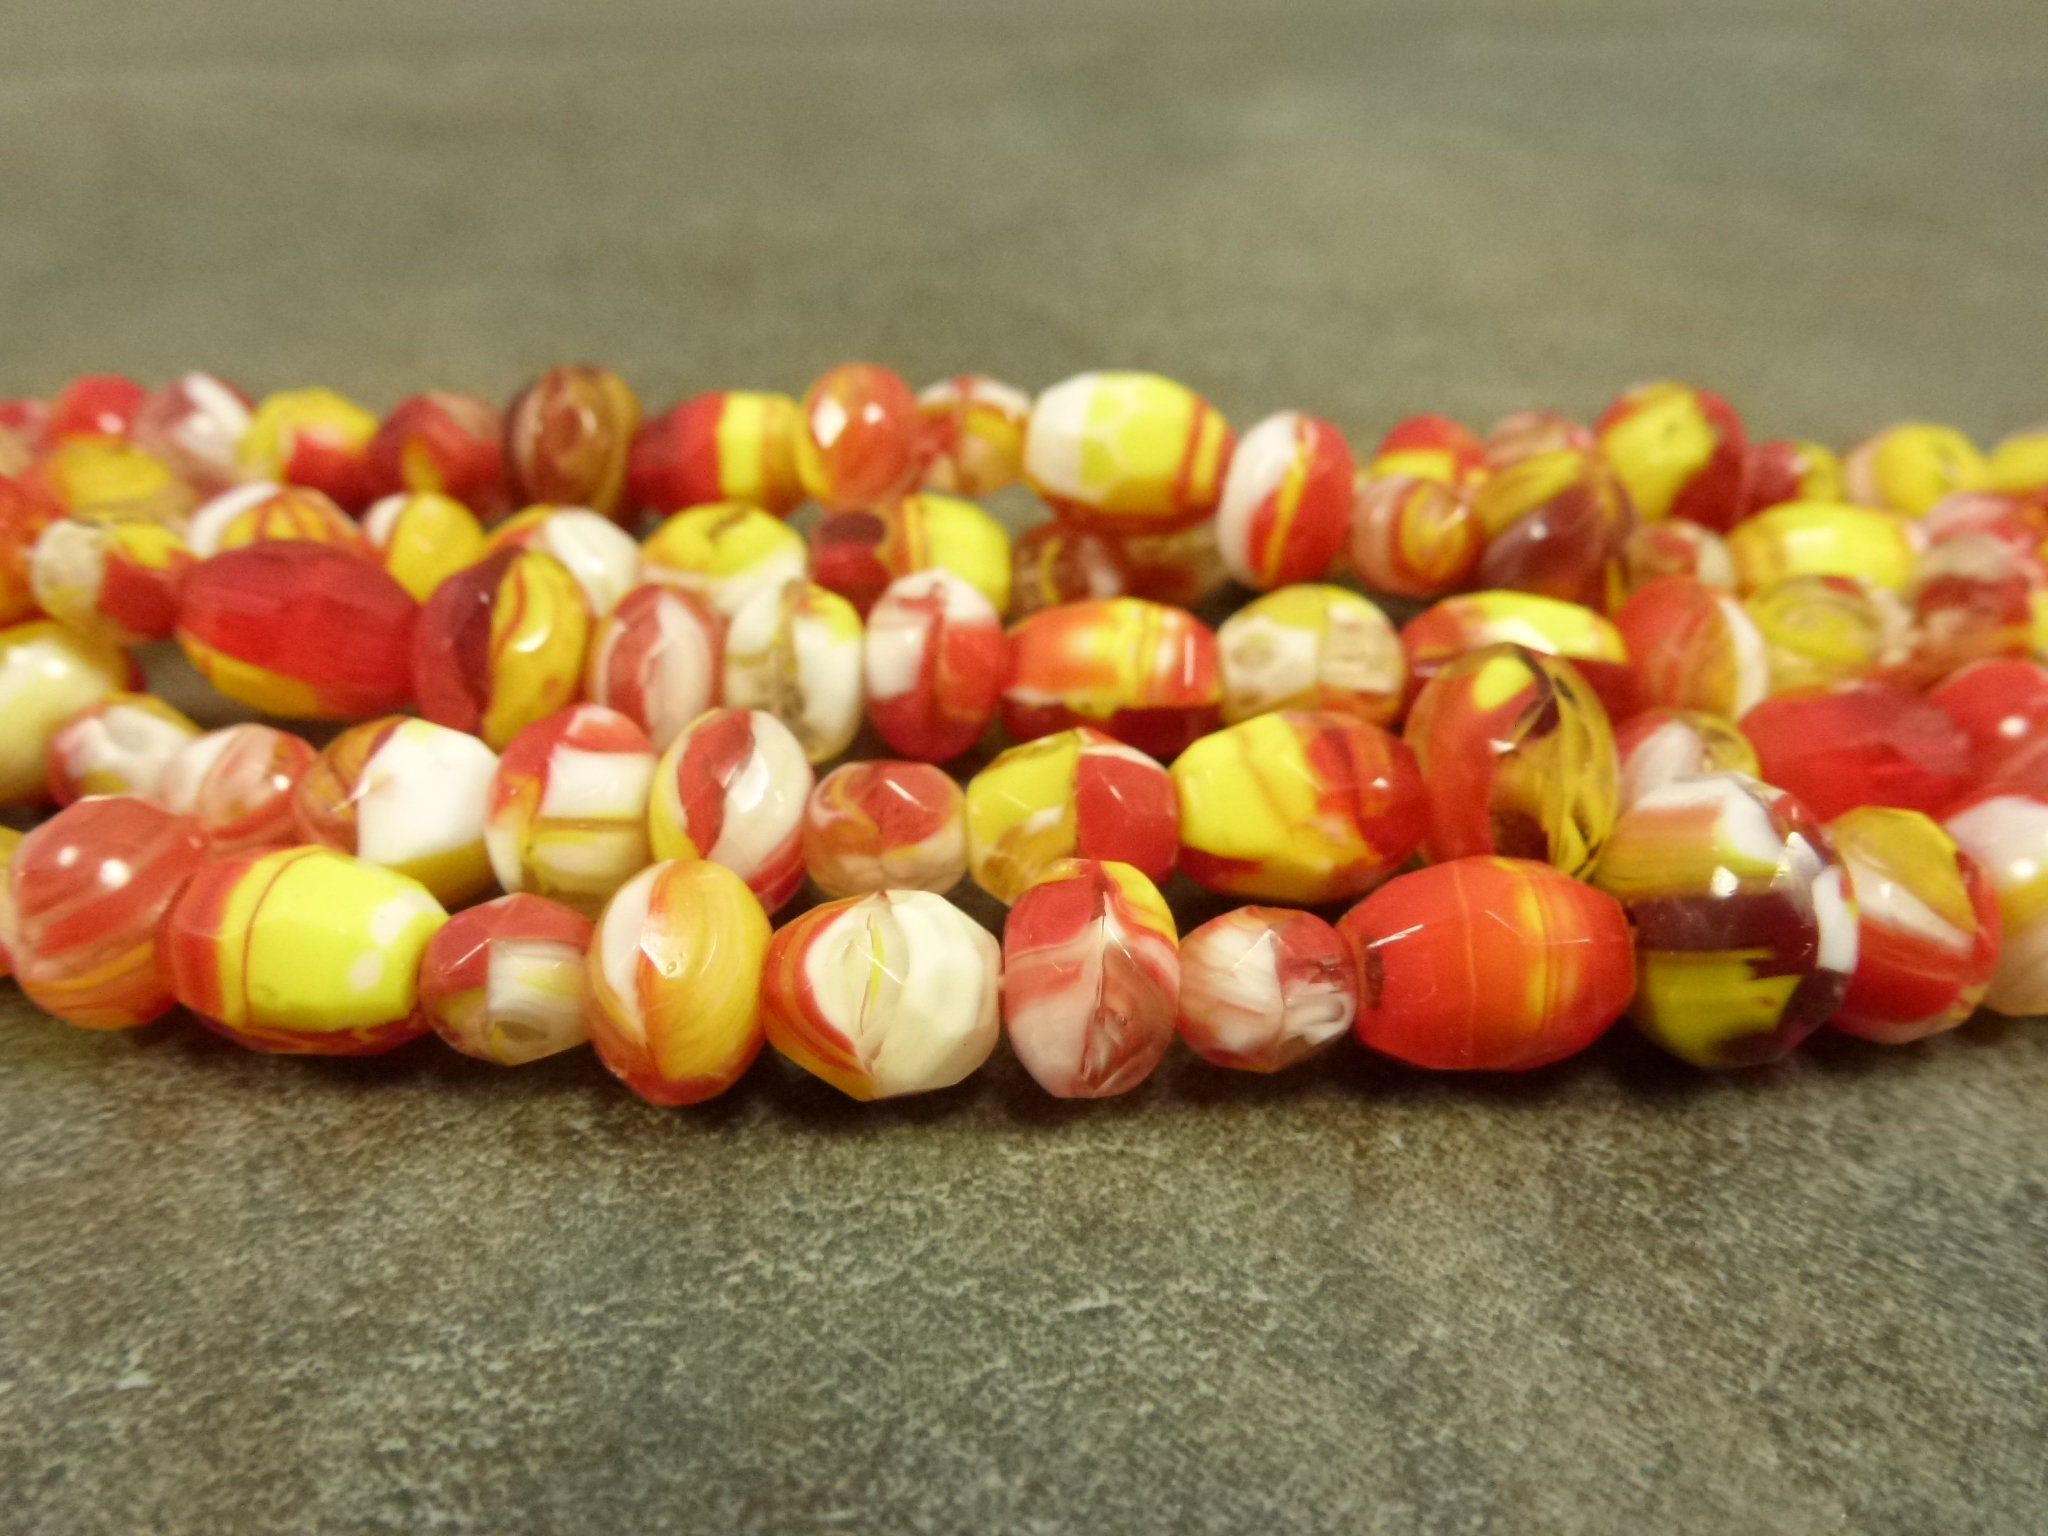 Red/Yellow/White Blend Czech Glass Bead Mix, 6-10mm, Faceted Firepolish Beads, 25Pc Strand, Rondelle, Round, Oval